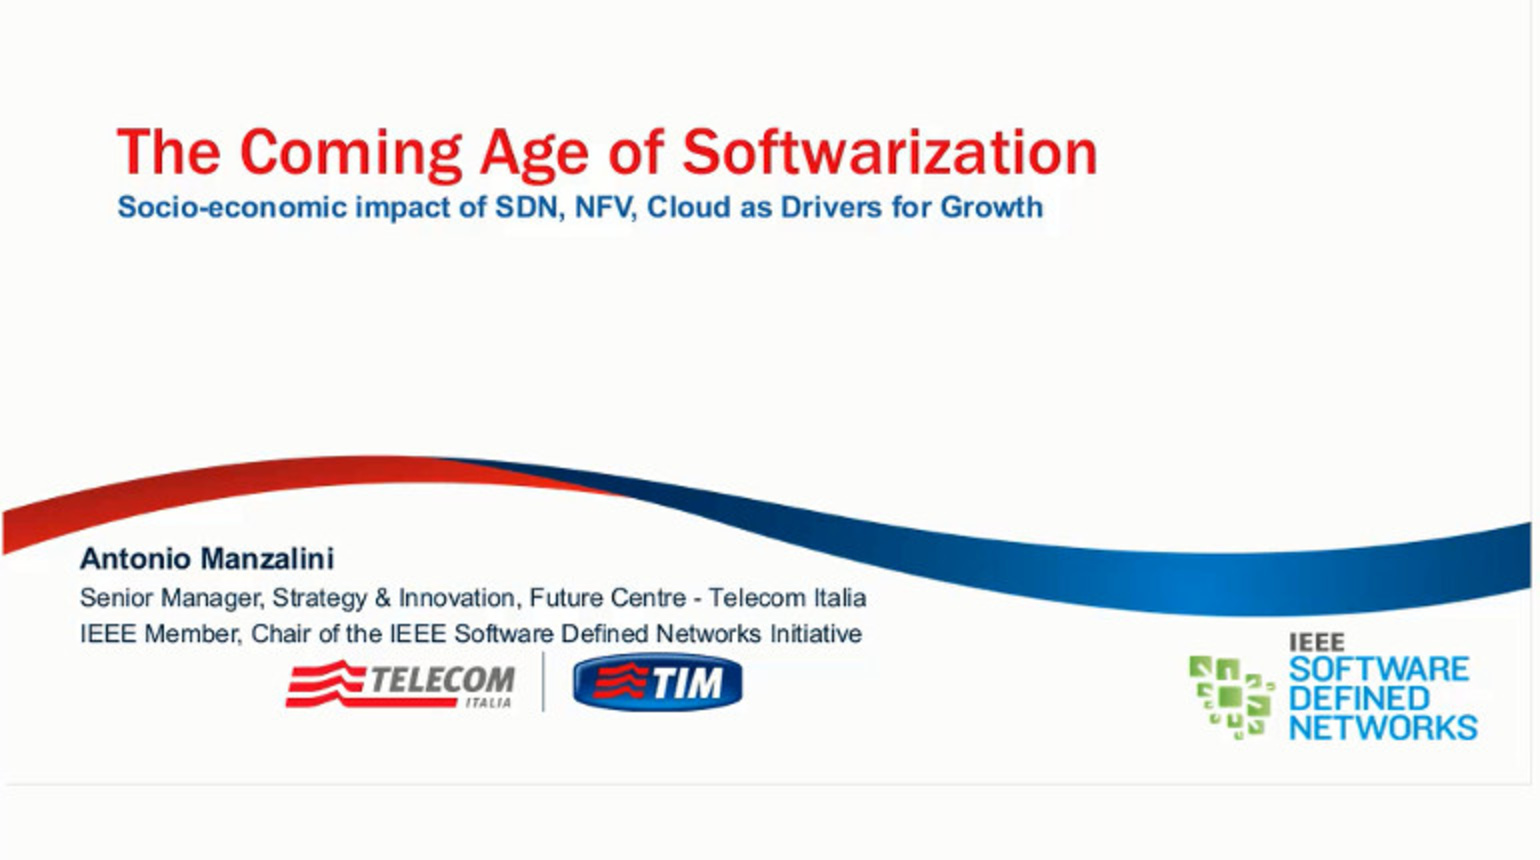 The Coming Age of Softwarization - Socio-economic Impact of SDN, NFV, Cloud as Drivers for Growth